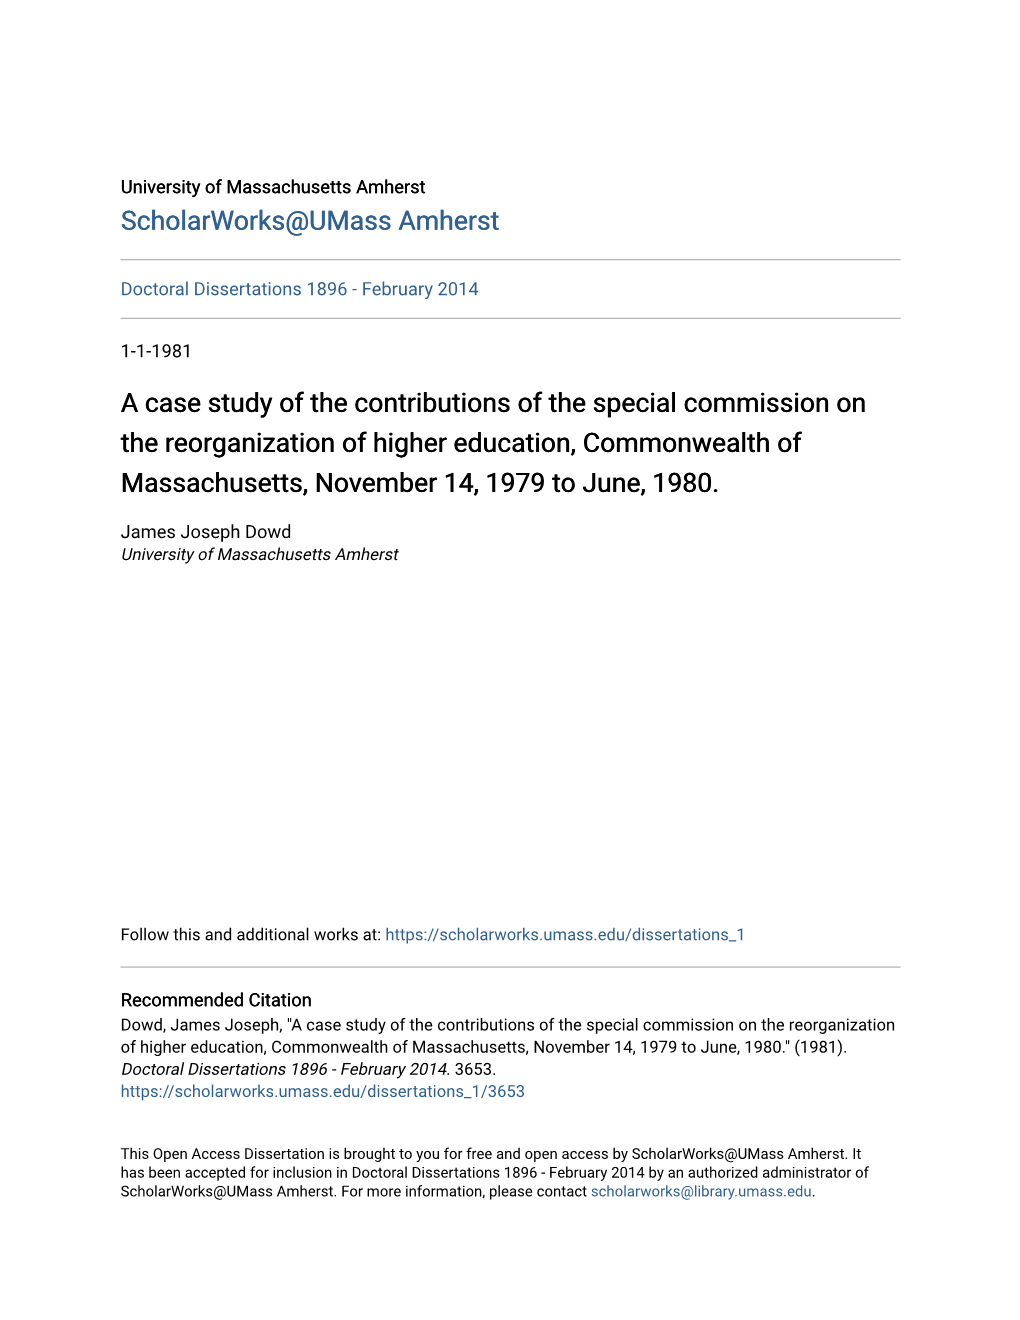 A Case Study of the Contributions of the Special Commission on the Reorganization of Higher Education, Commonwealth of Massachusetts, November 14, 1979 to June, 1980